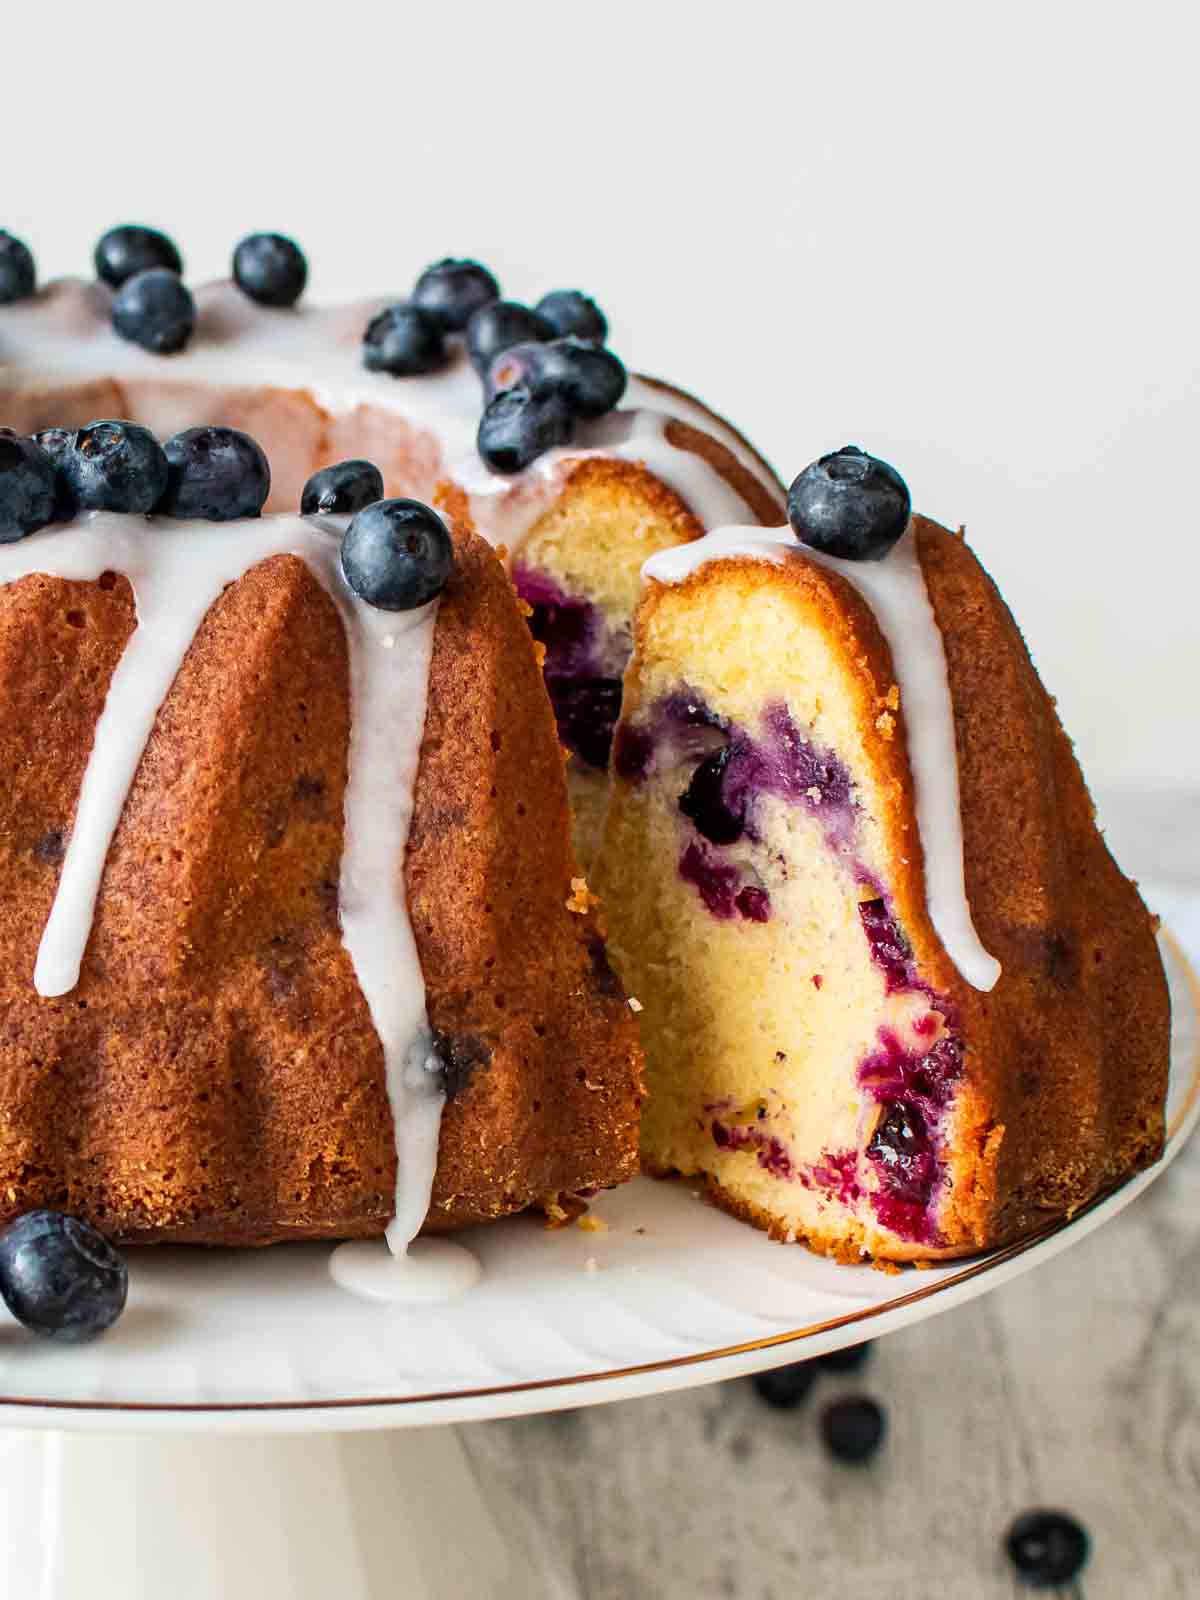 Blueberry pound cake on a white cake stand with a slice cut and pulled out.